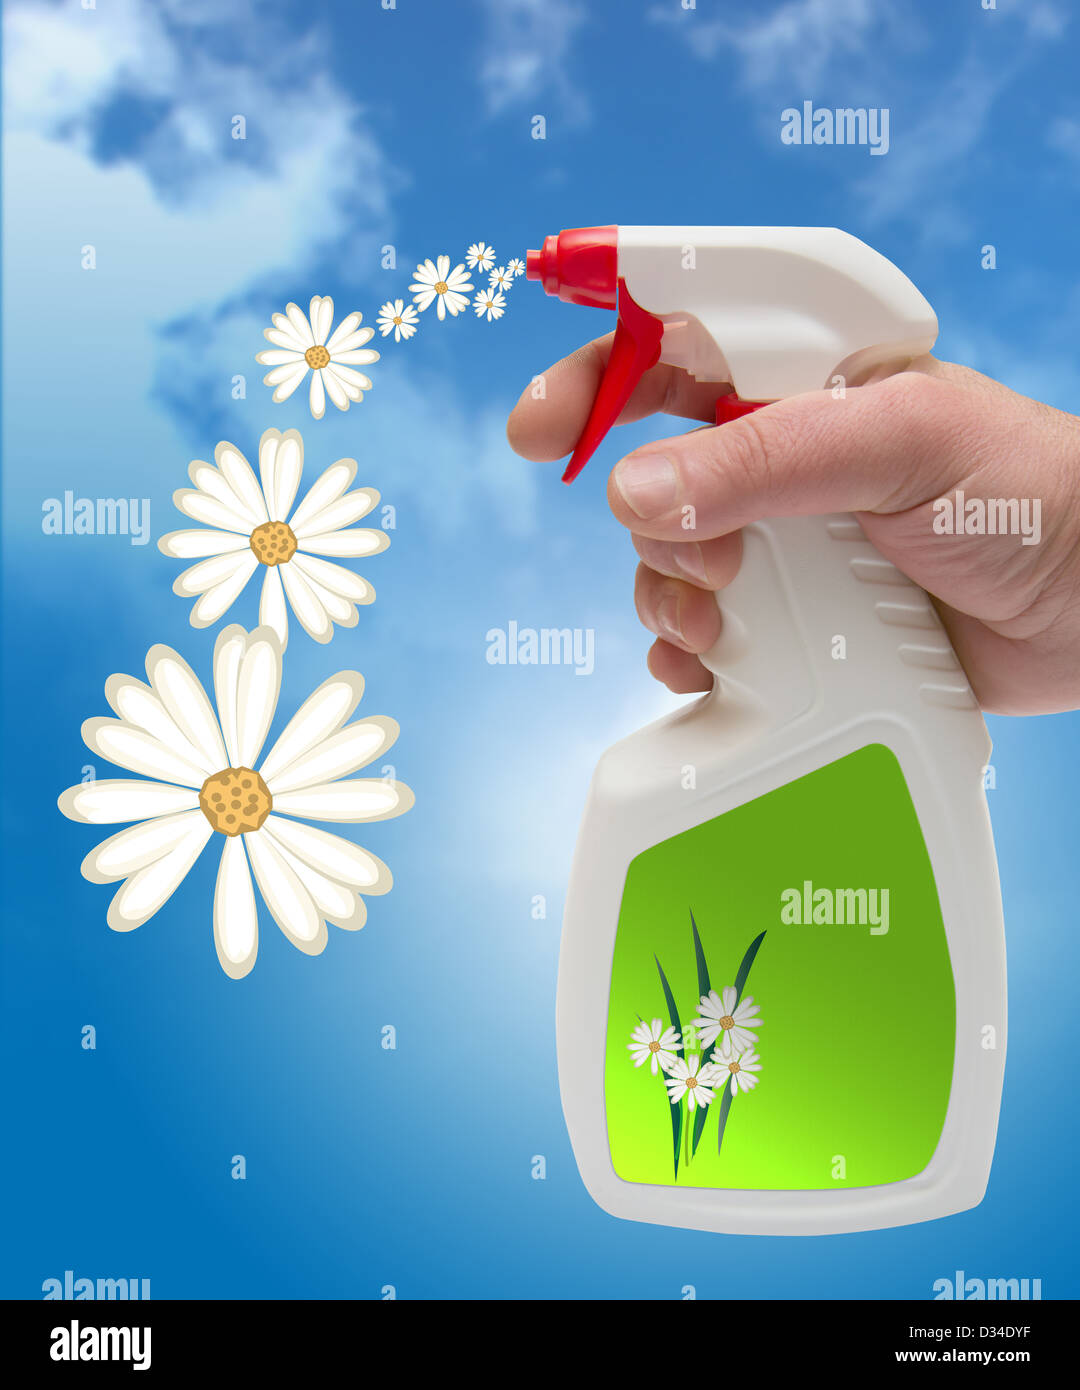 ecological and scented spray cleaner Stock Photo